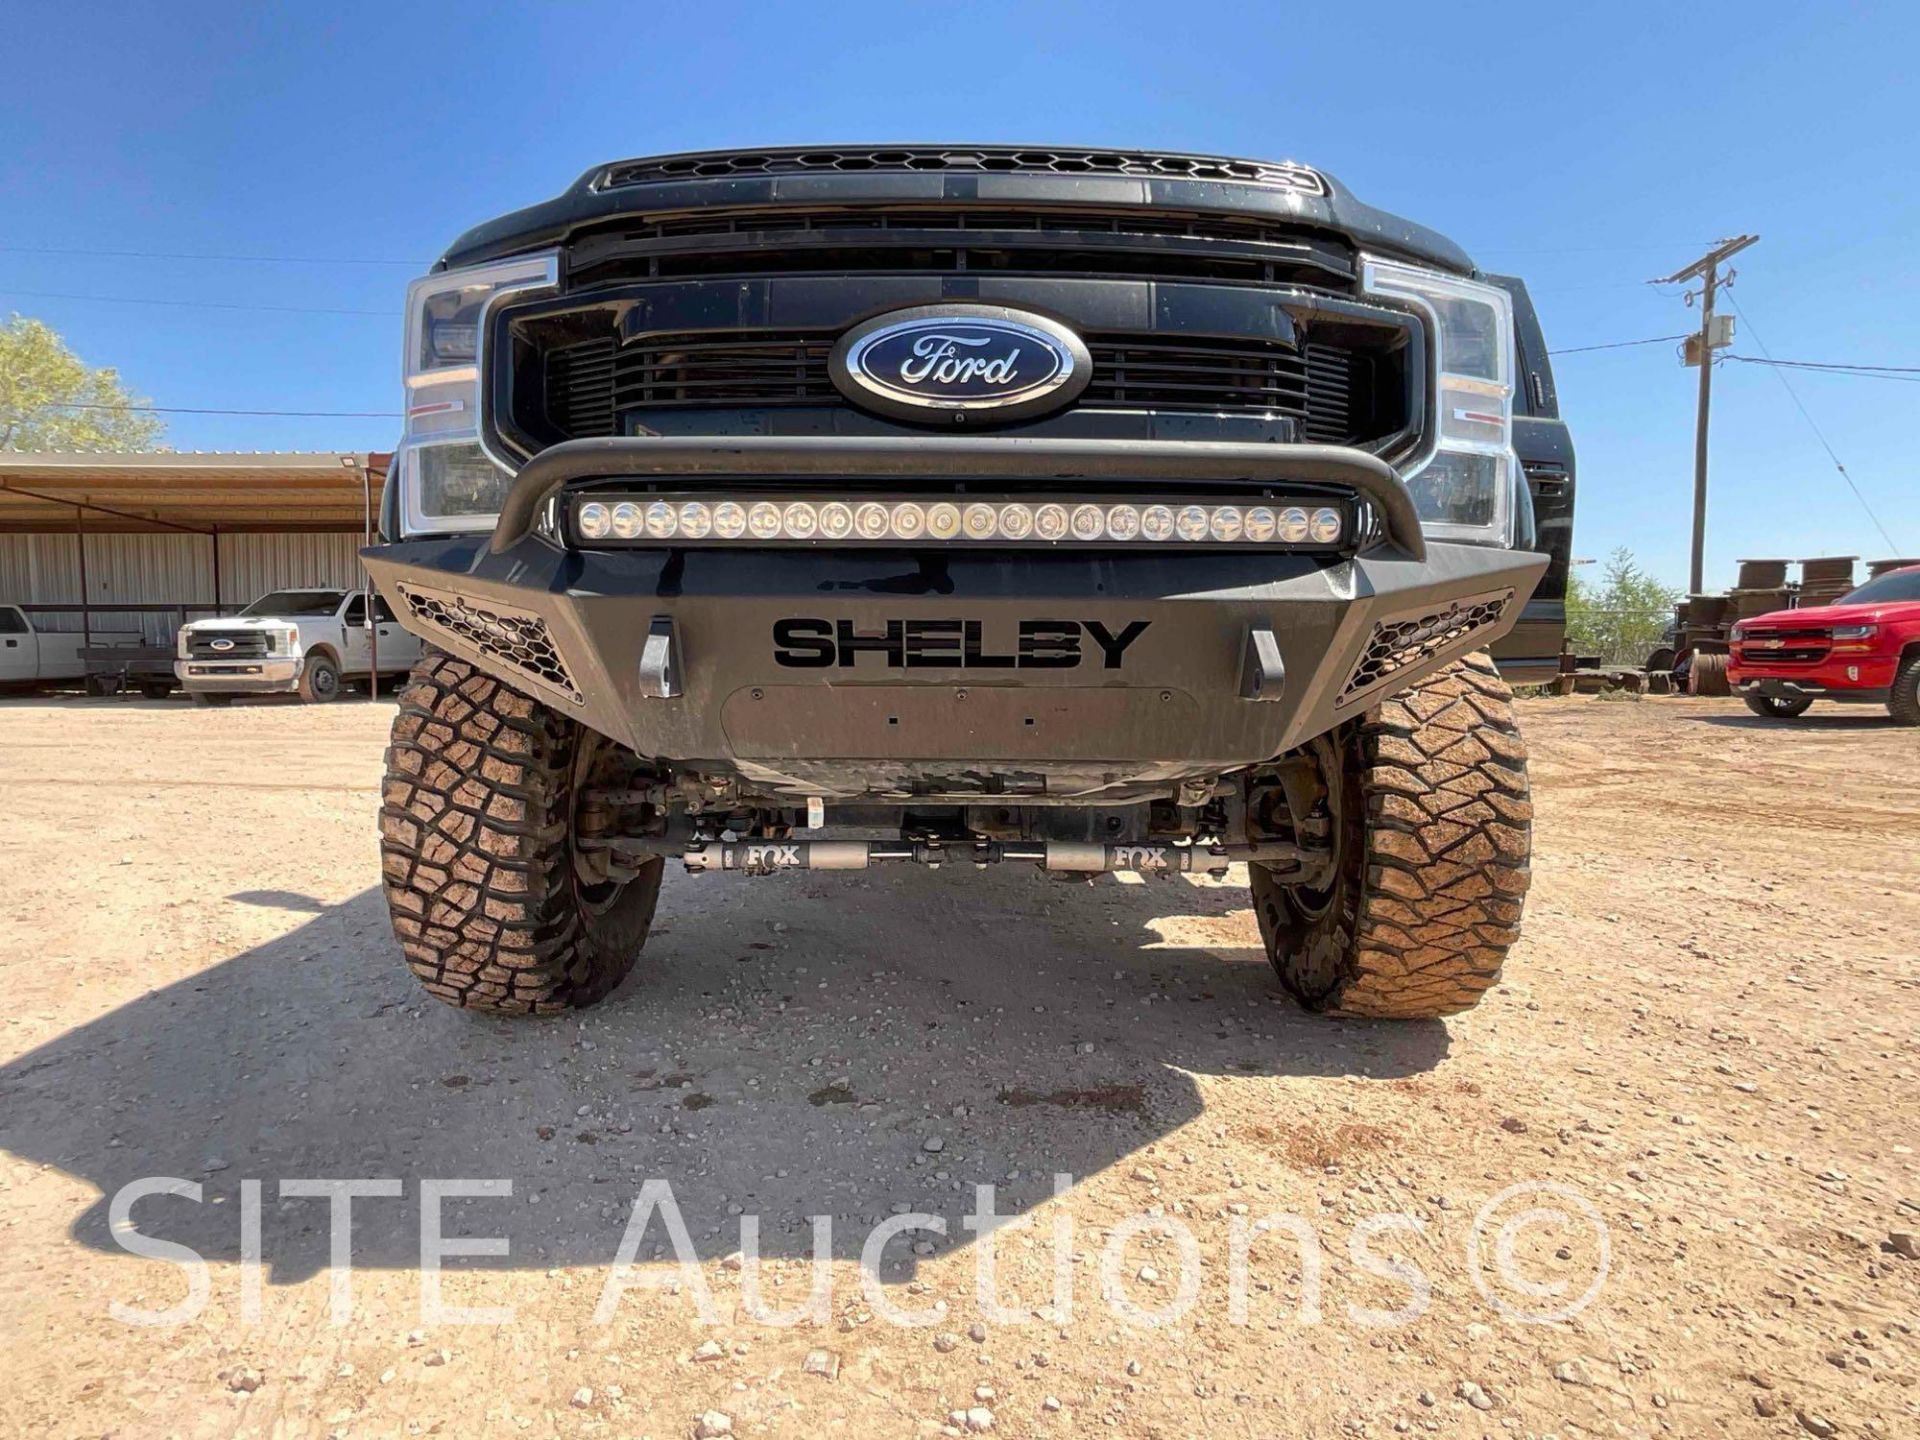 2021 Ford F250 SD Shelby Super Baja Crew Cab Pickup Truck - Image 22 of 24